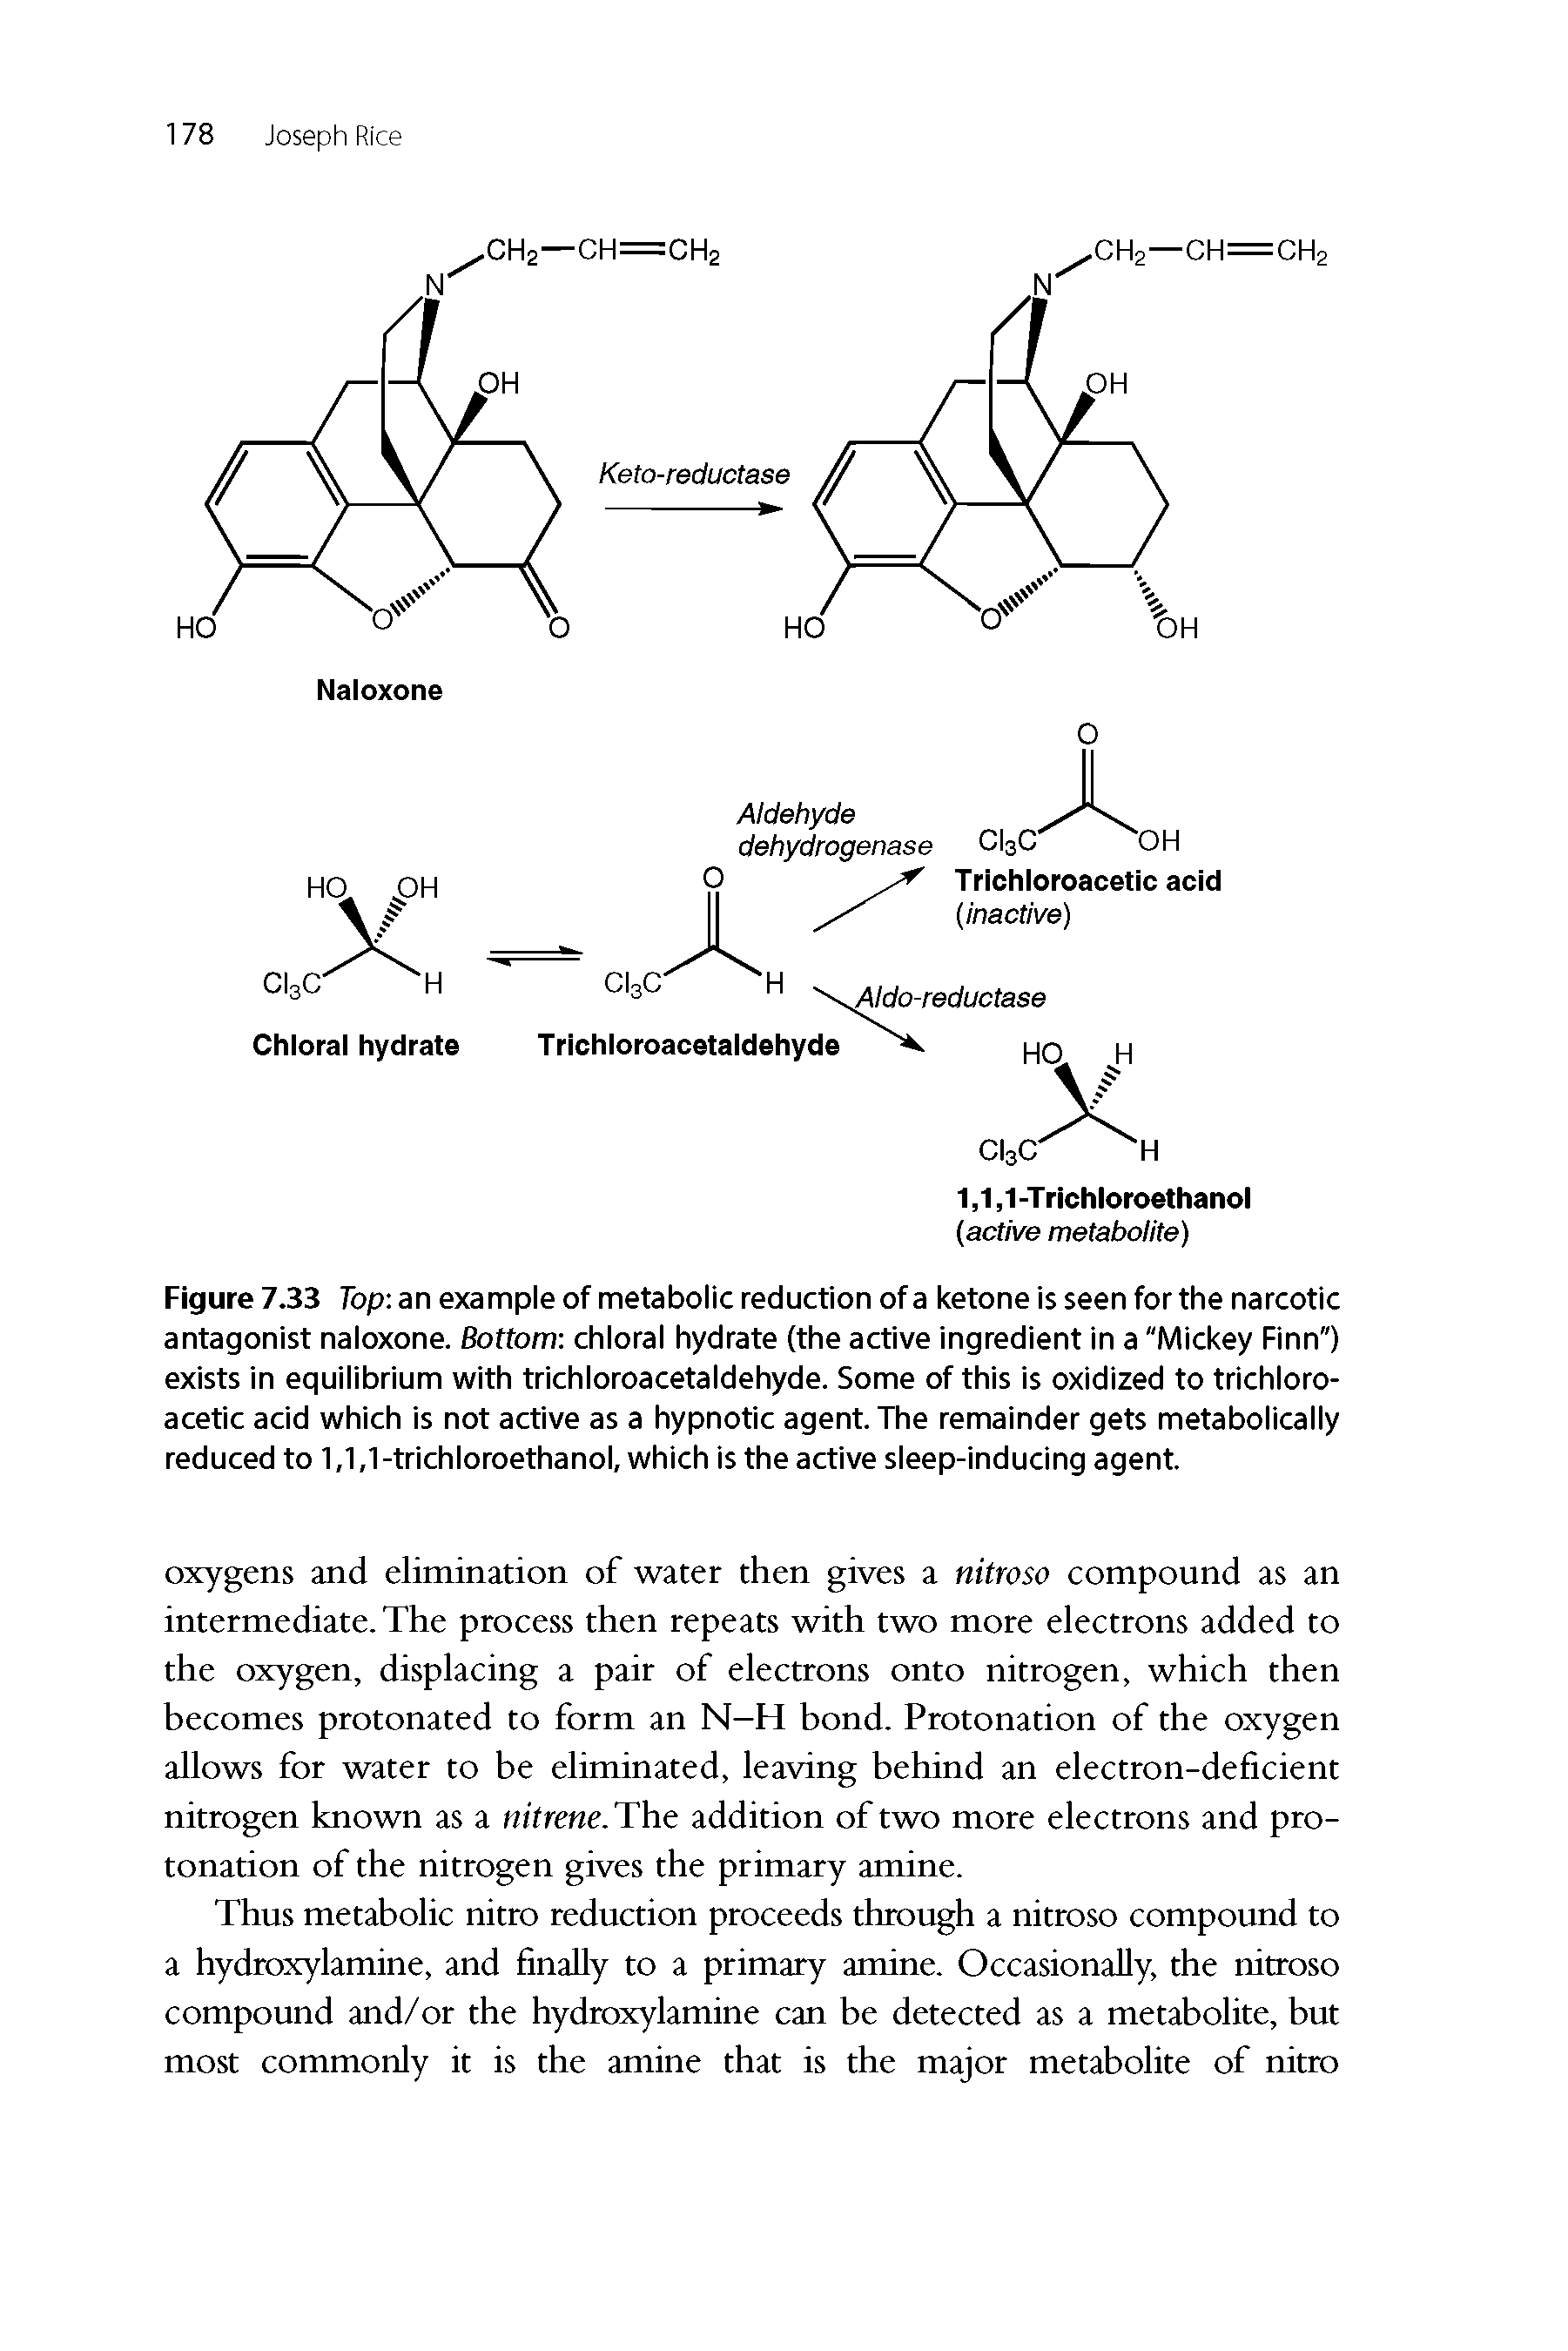 Figure 7.33 Top an example of metabolic reduction of a ketone is seen for the narcotic antagonist naloxone. Bottom chloral hydrate (the active ingredient in a "Mickey Finn") exists in equilibrium with trichloroacetaldehyde. Some of this is oxidized to trichloroacetic acid which is not active as a hypnotic agent. The remainder gets metabolically reduced to 1,1,1-trichloroethanol, which is the active sleep-inducing agent.